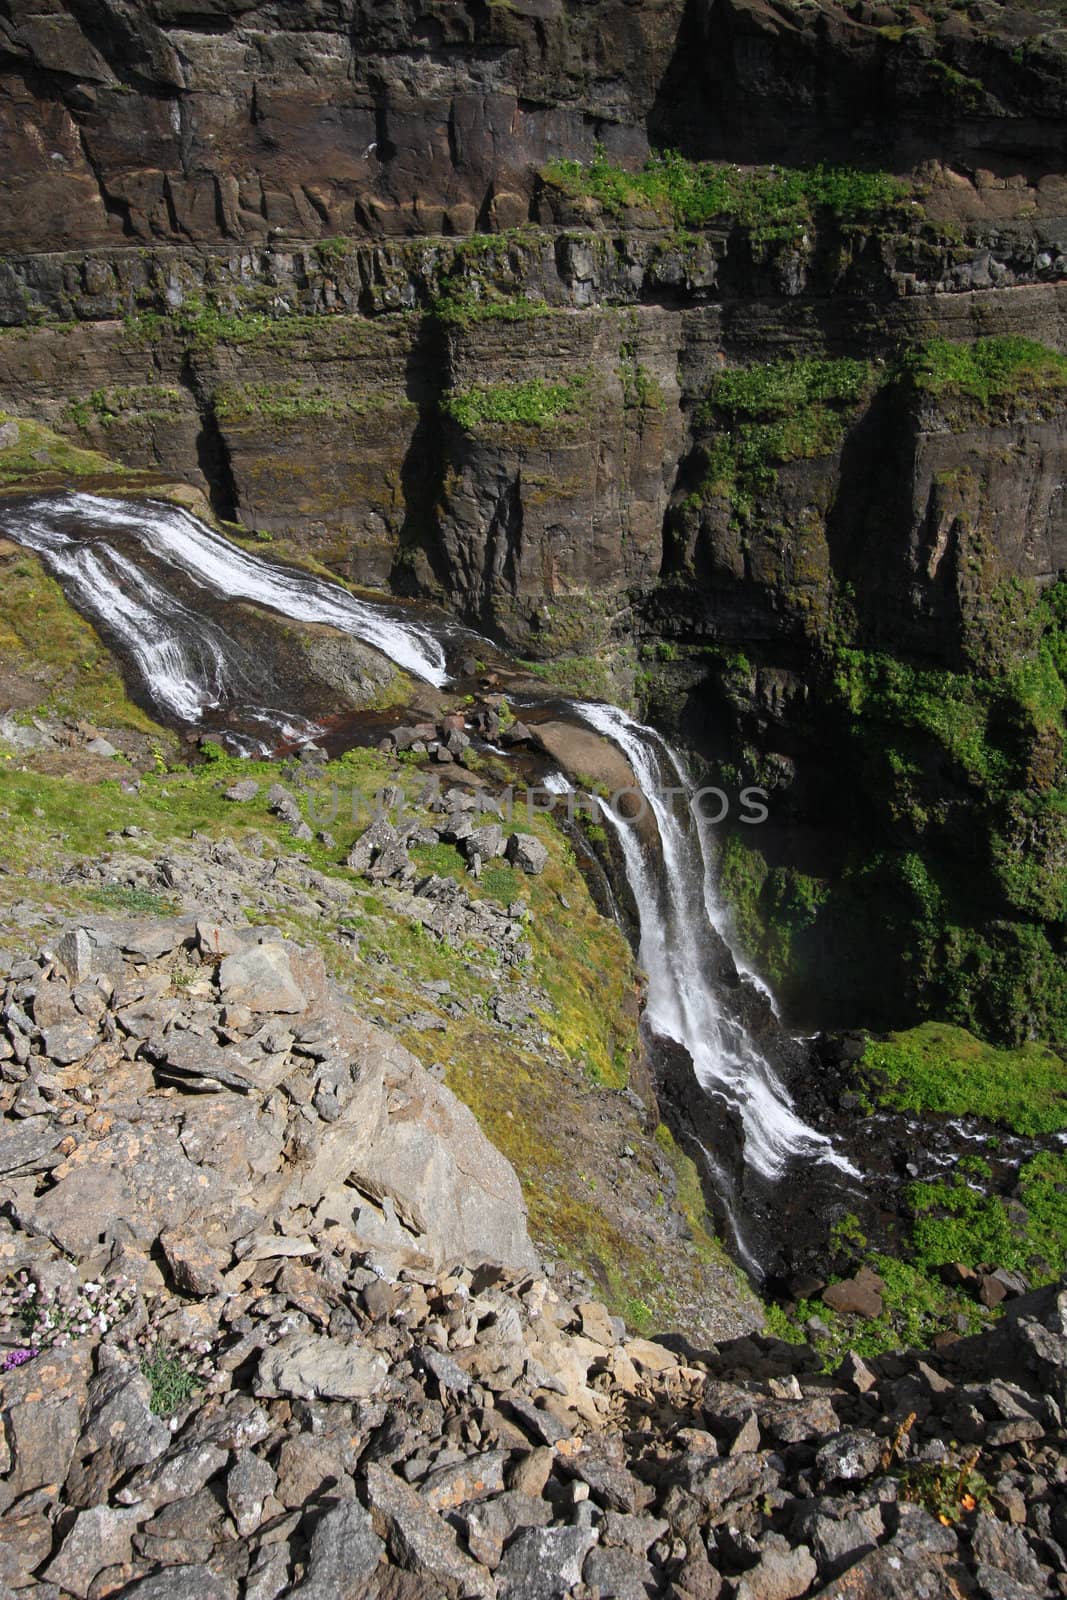 Glymur - tallest waterfall in Iceland. Beautiful mountain river canyon.